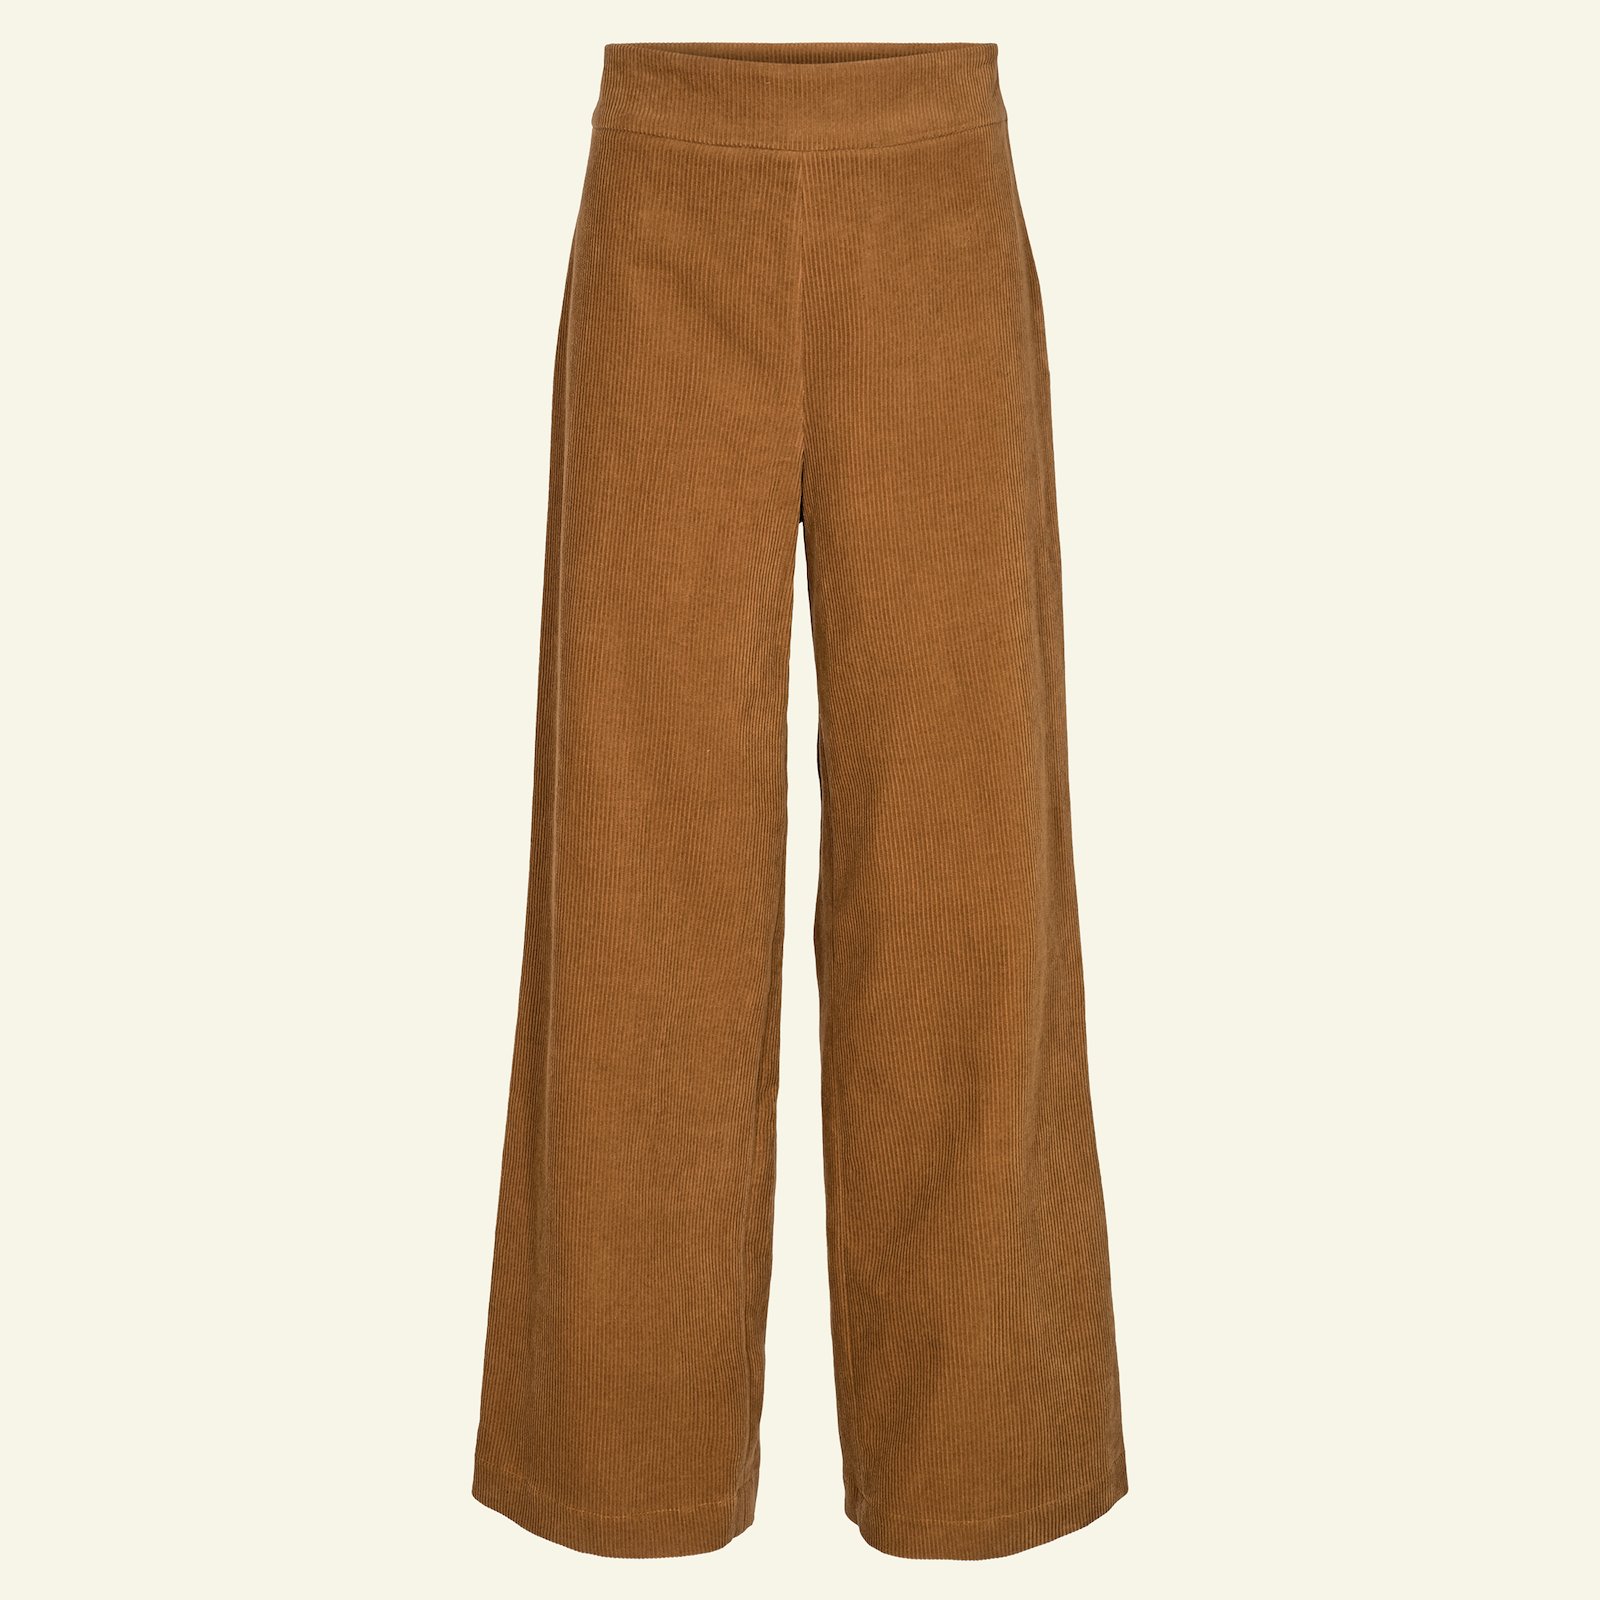 Highwaist and wide legs trousers, 42/14 p20052_430810_sskit